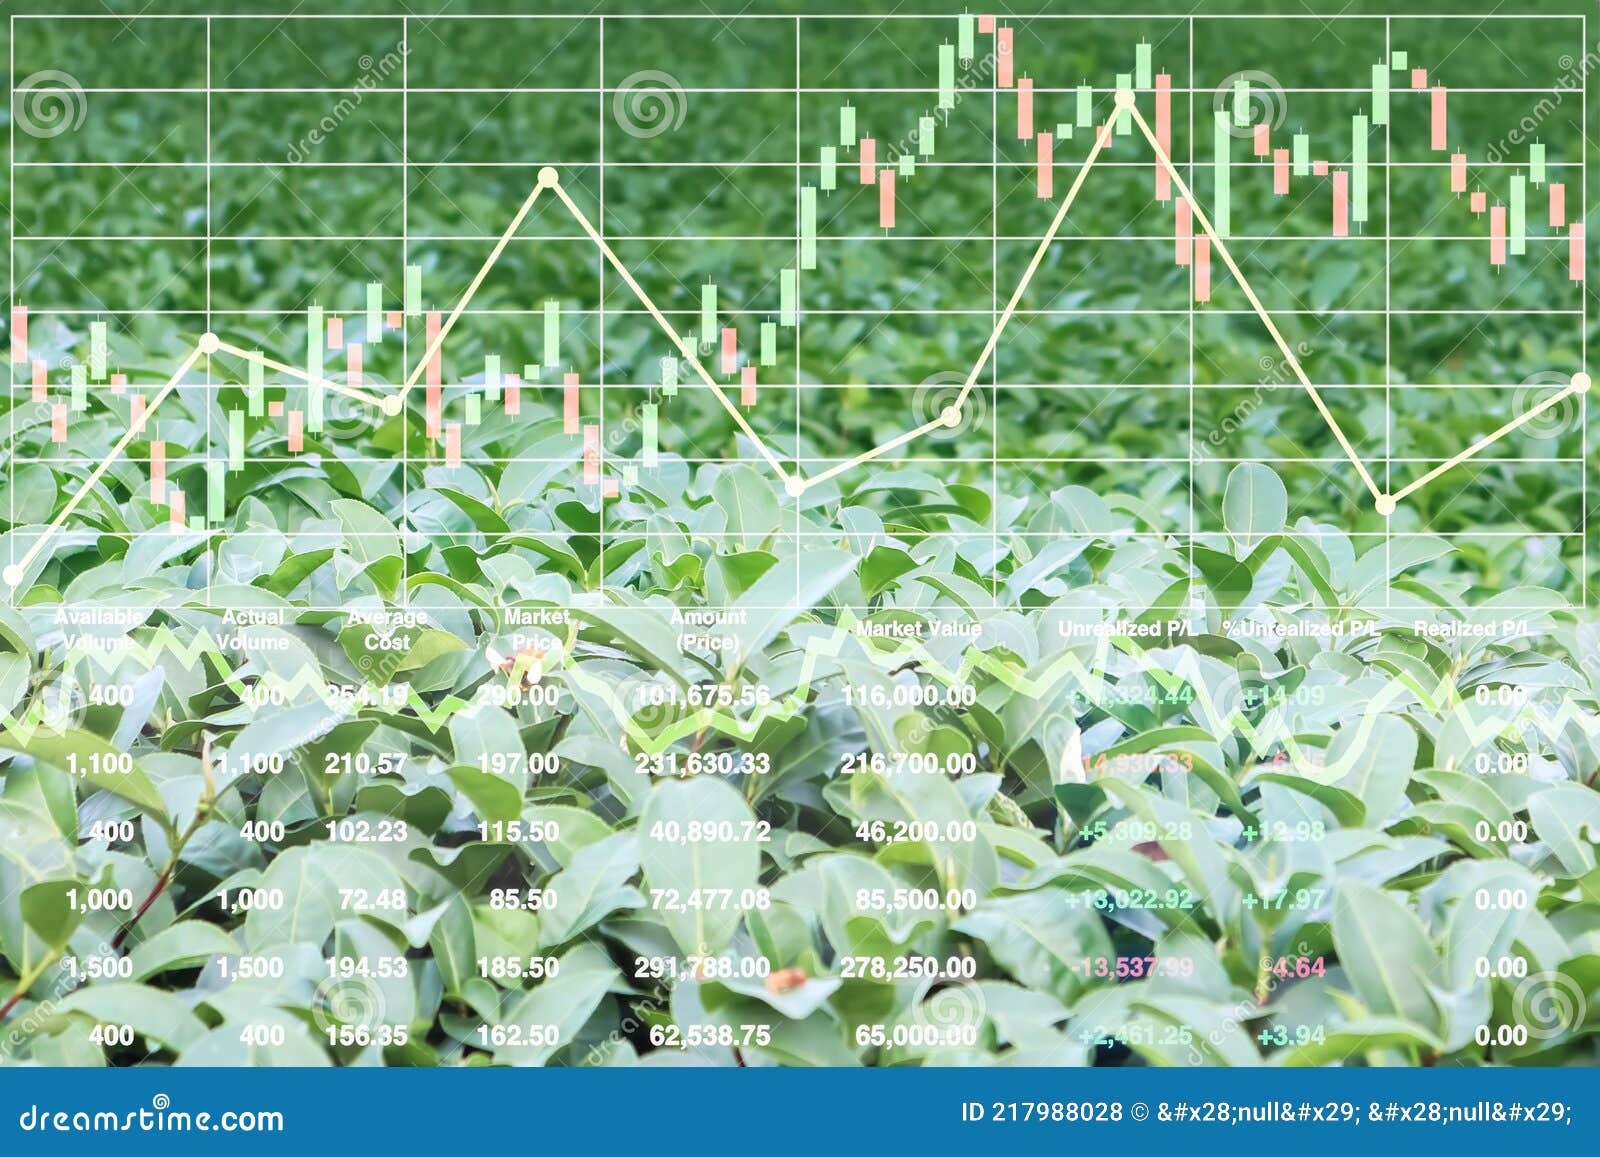 Stock Market Index Information Data on Agriculture Vegetable for Food in  the Organic Farm Industry Business for Presentation and Stock Photo - Image  of industry, fresh: 217988028